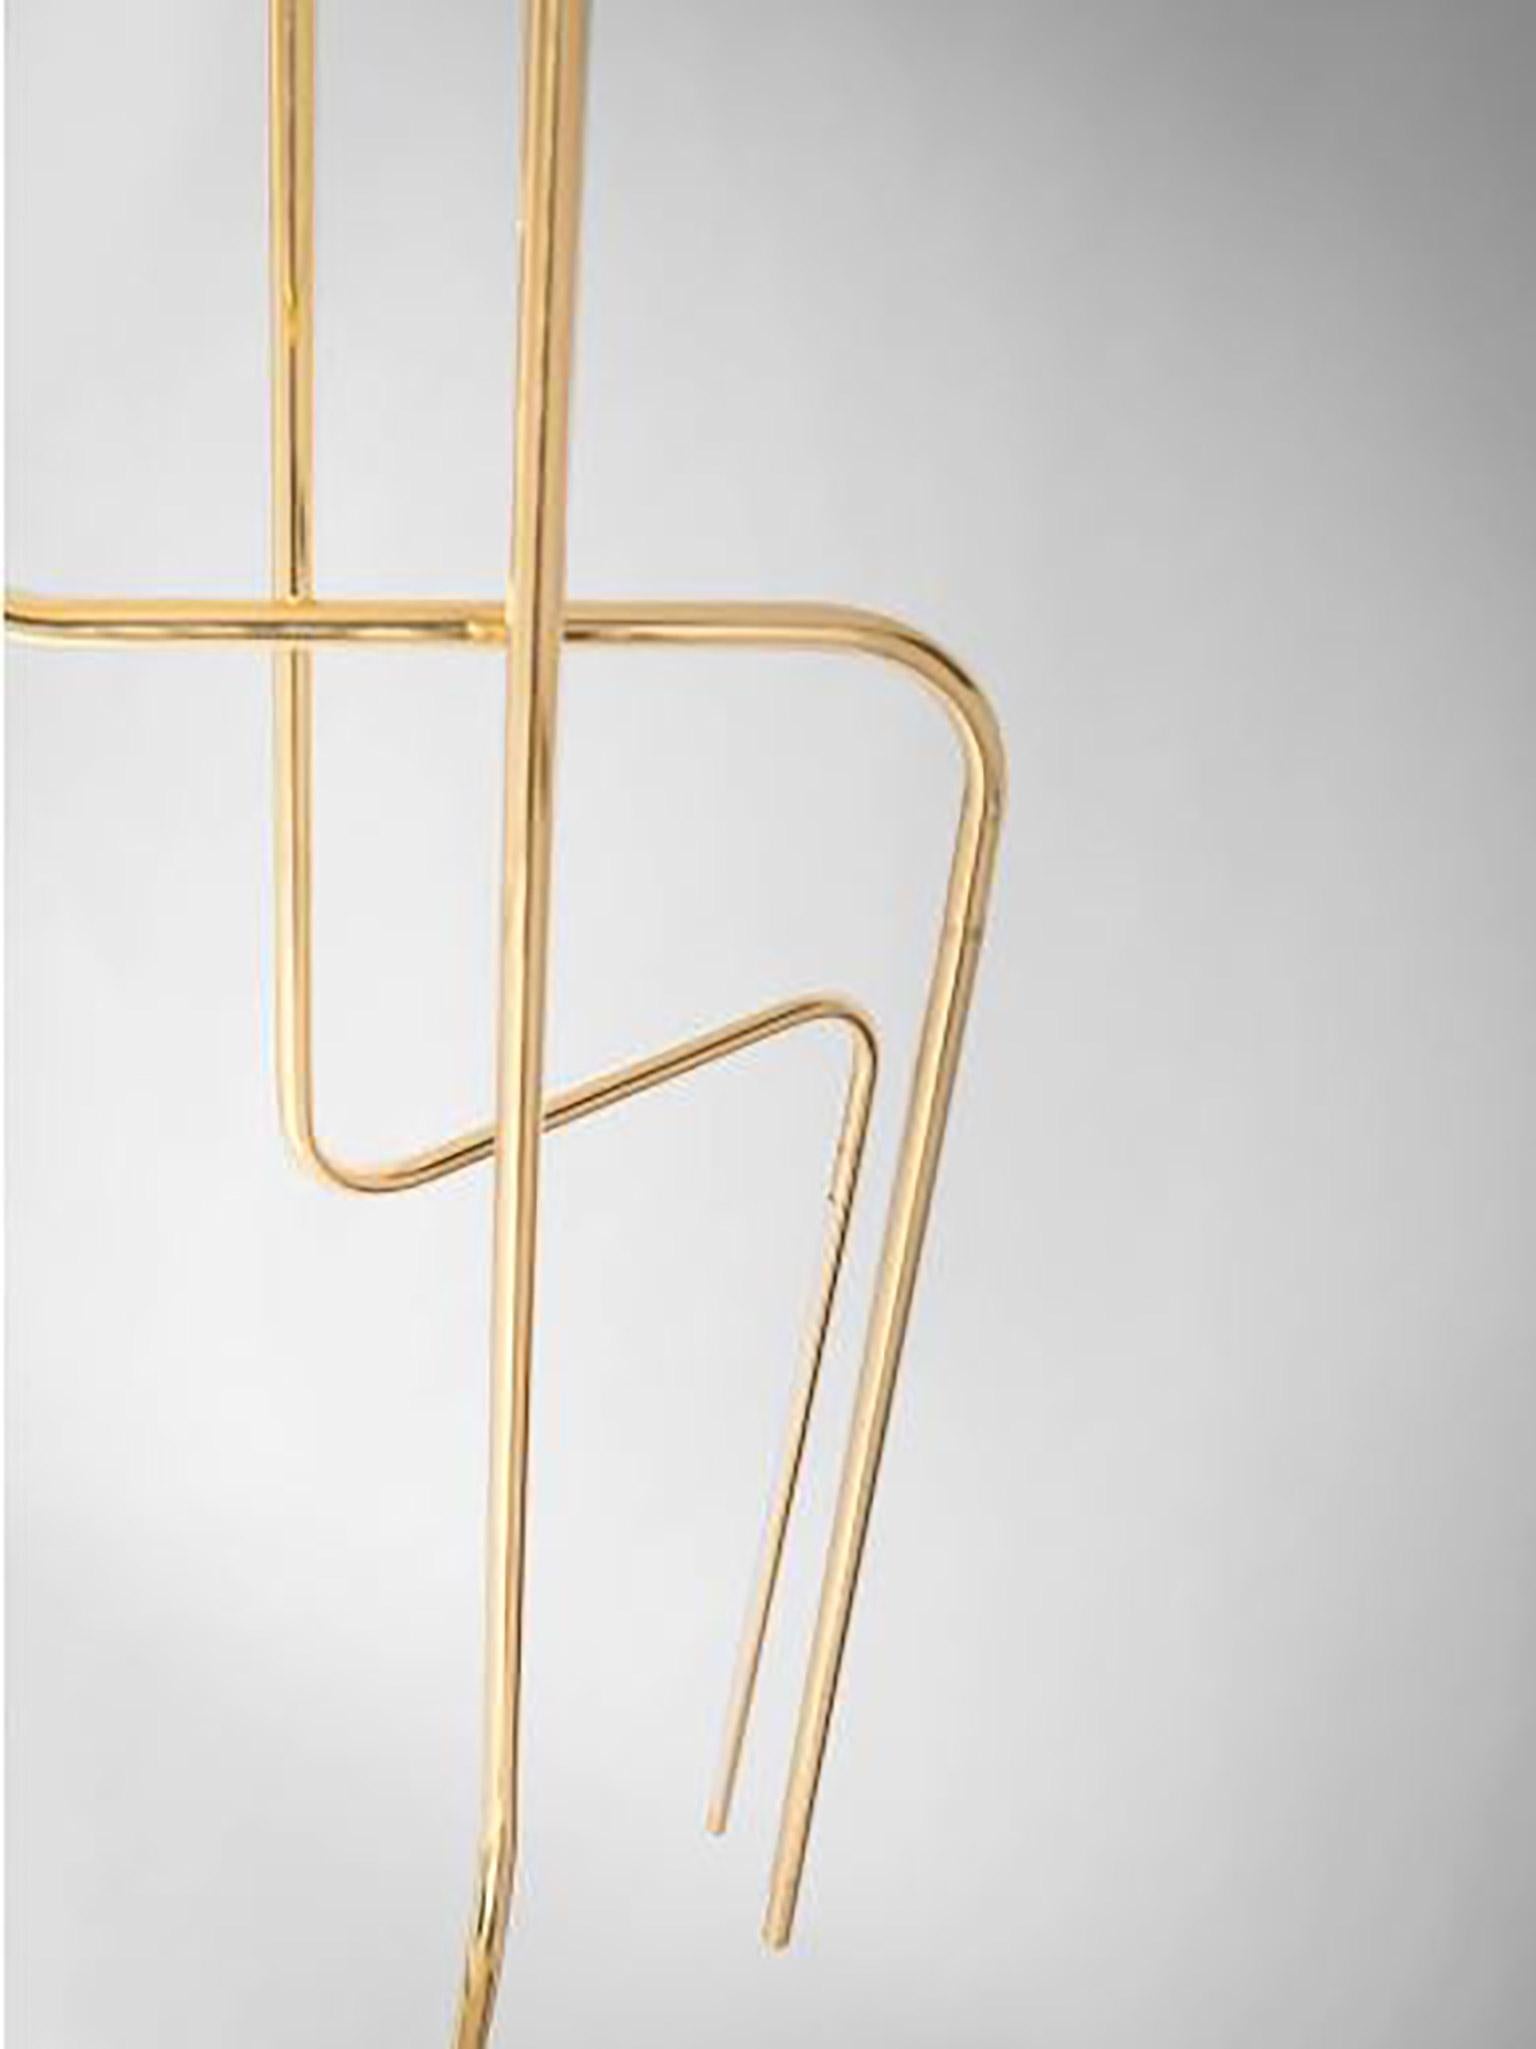 Italian Gold Contemporary Ceiling Lamp in Tubular Brass, Led Lamp Type